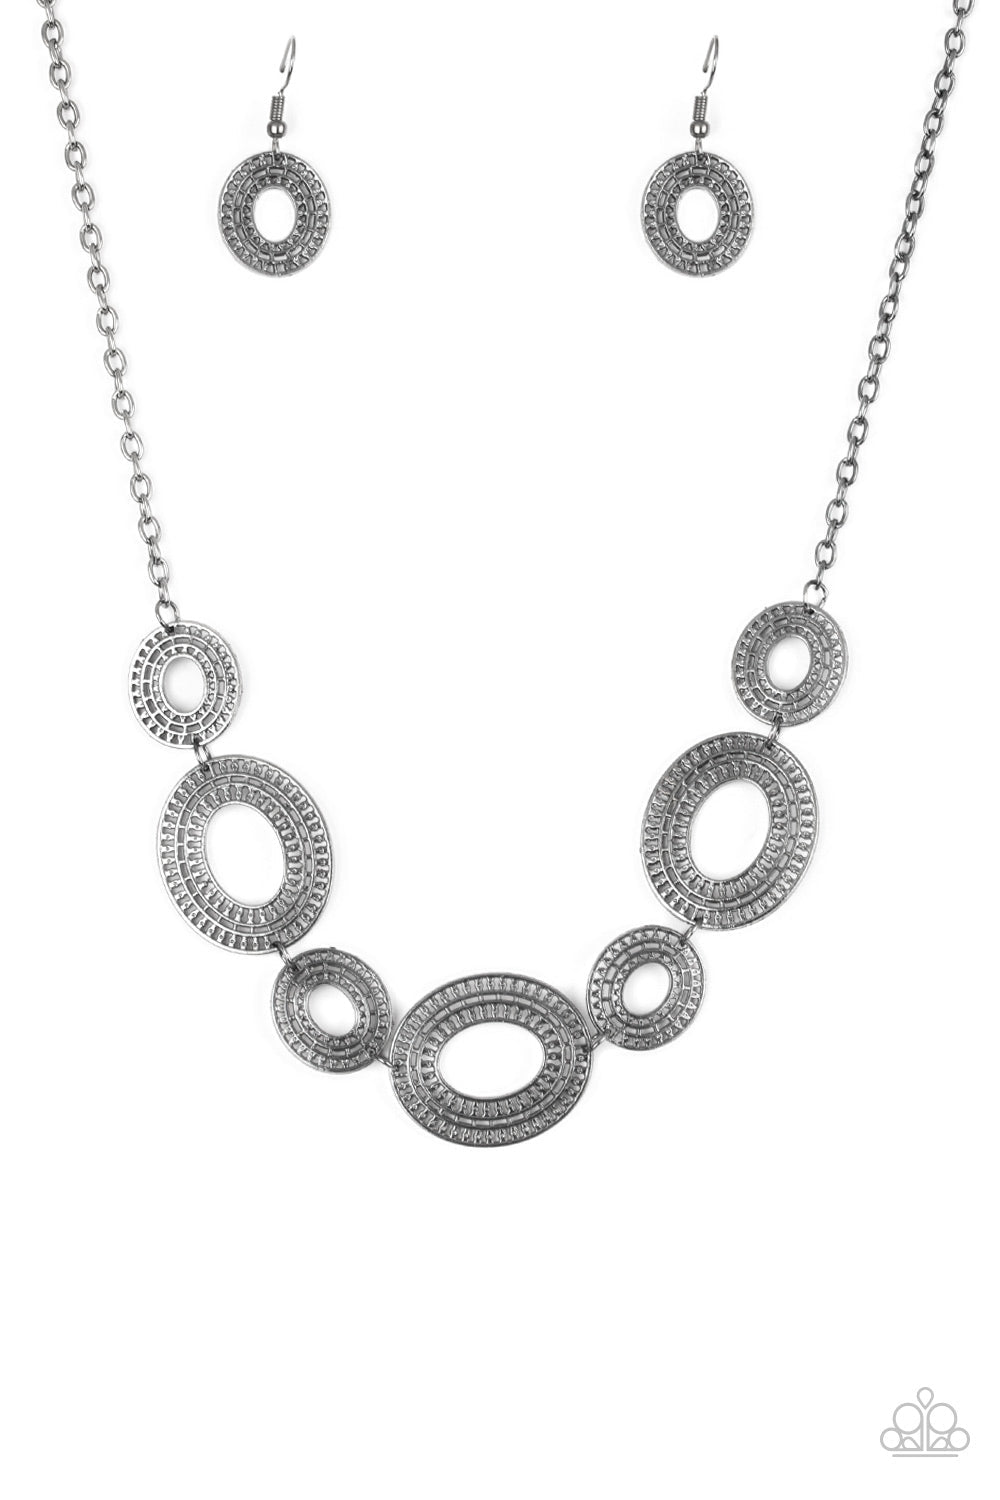 Basically Baltic - Black Metal ( Gunmetal ) Necklace - Paparazzi Accessories - Radiating with circular details, airy oval frames link below the collar for a casual stylish necklace.